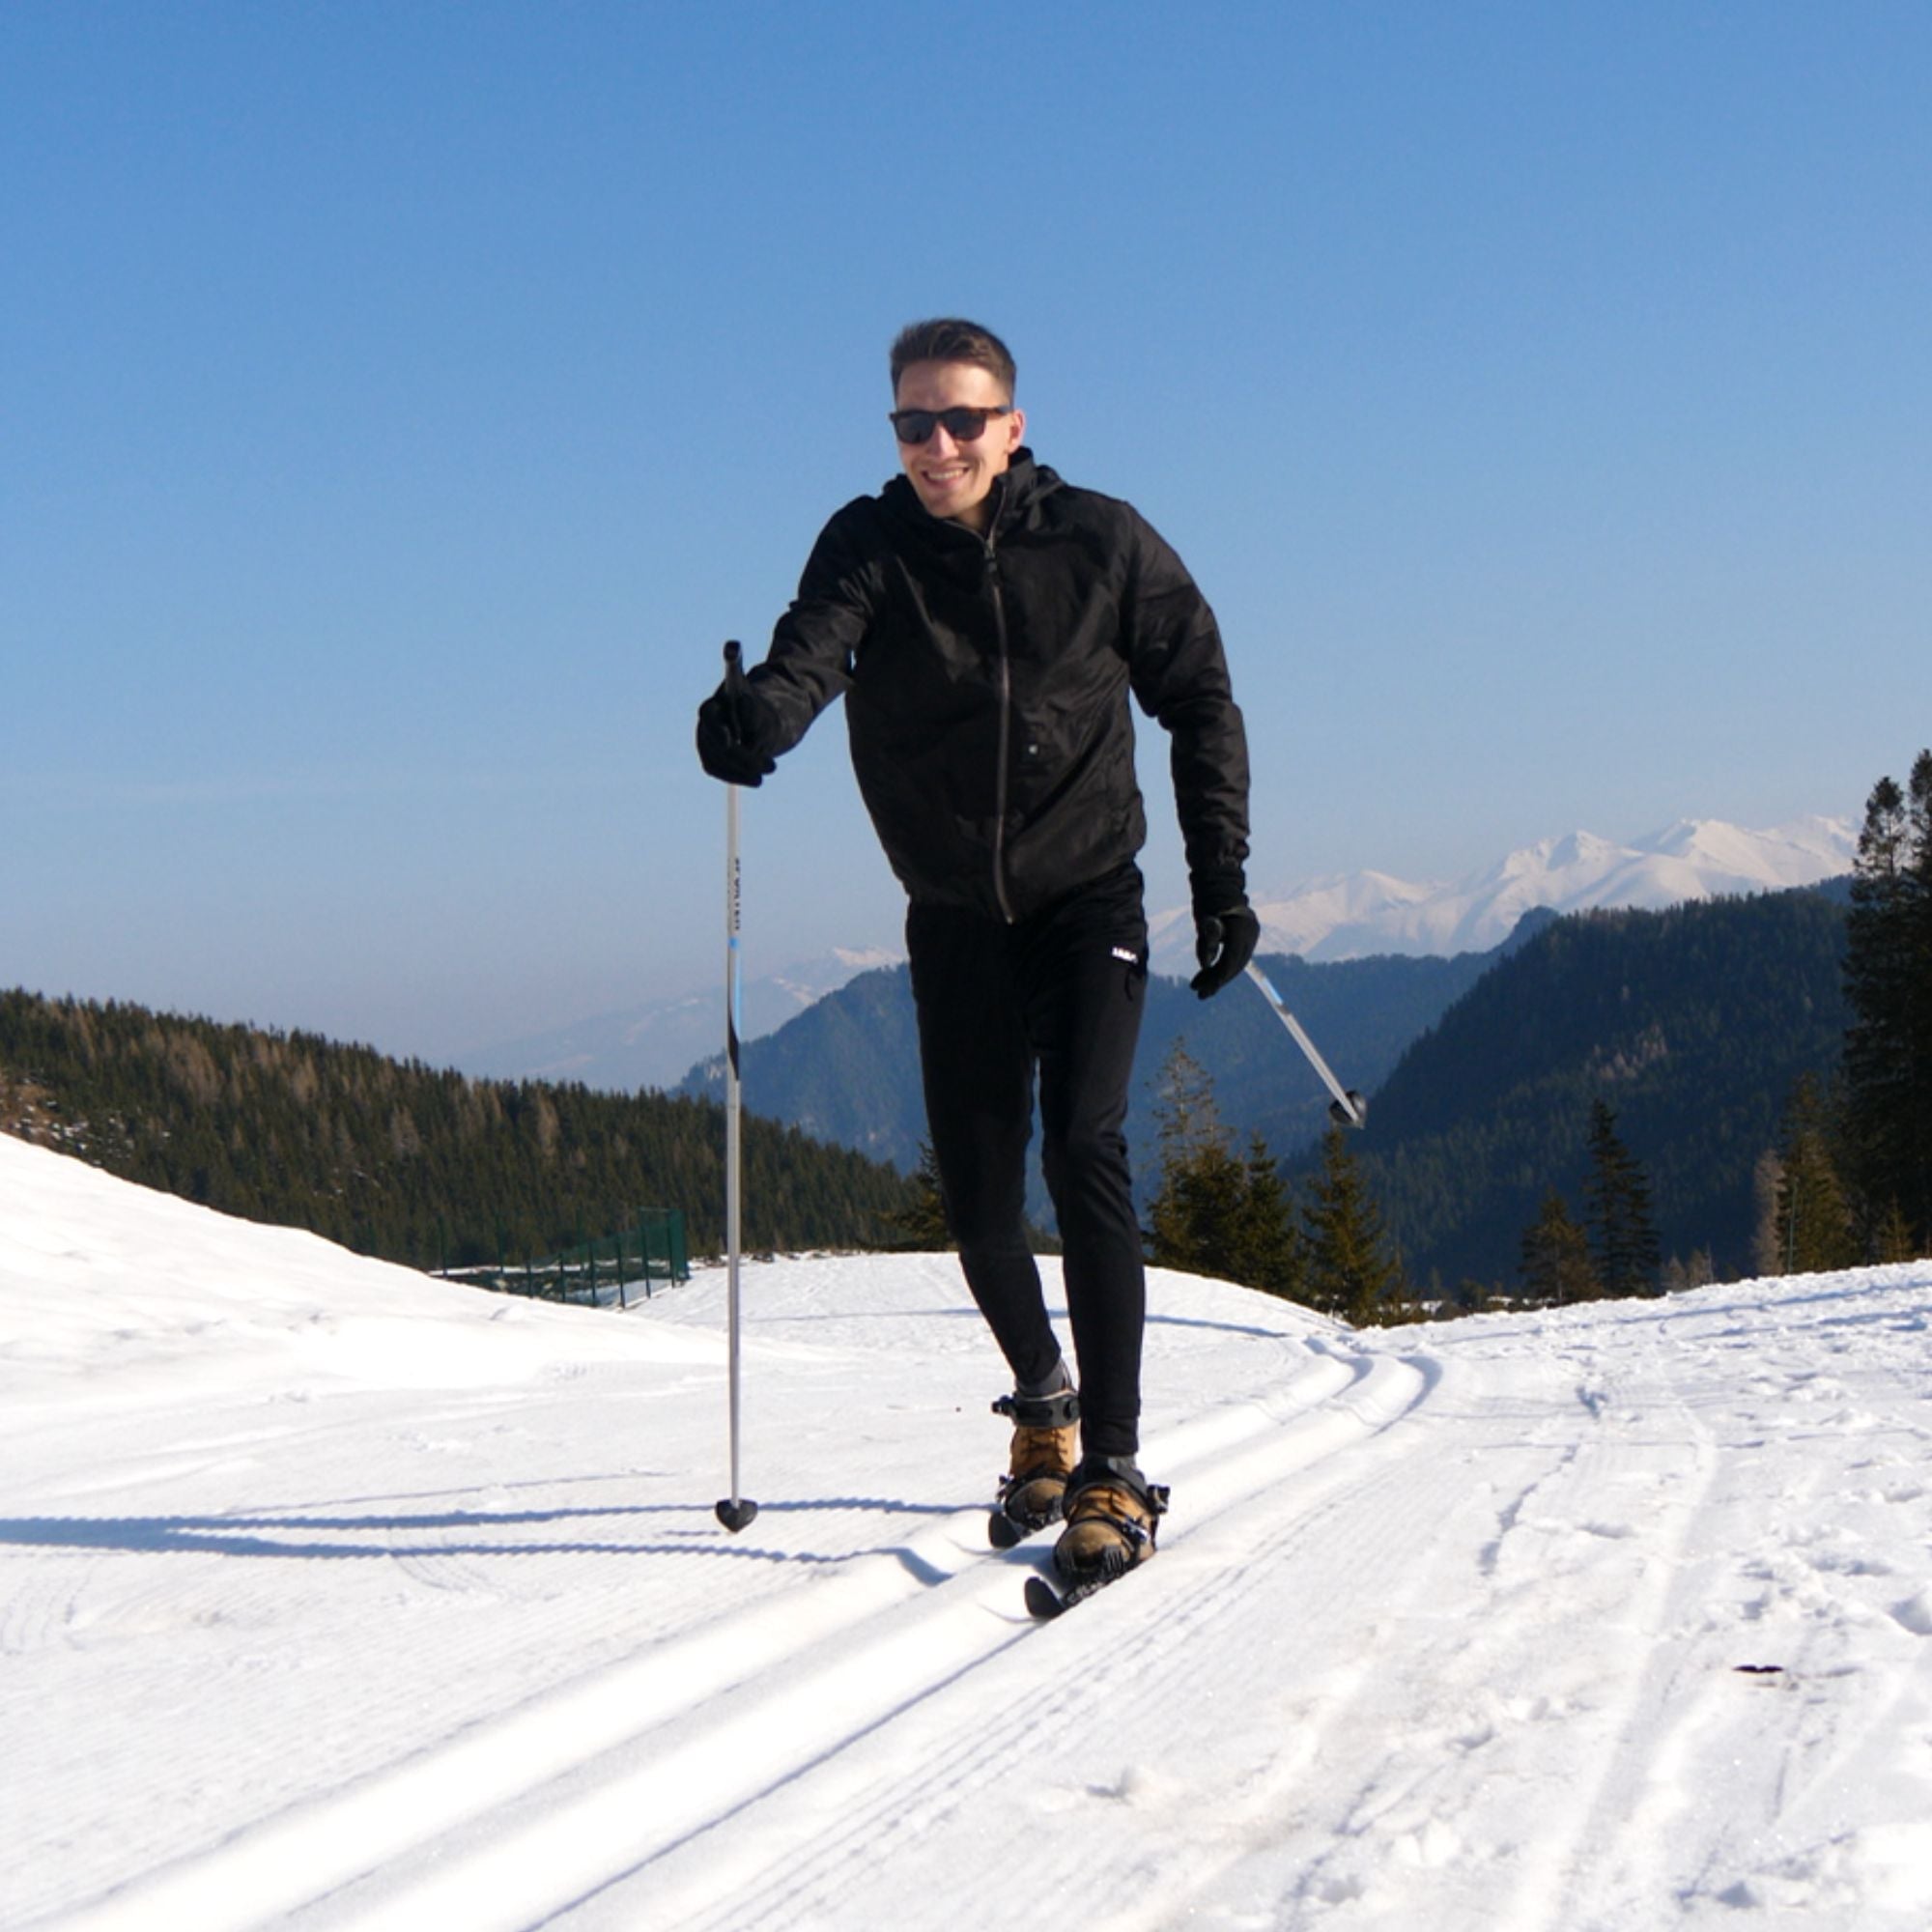 World’s shortest Snowfeet nordic skis. LENGTH - Only 90 cm / 35 Inch  Great for beginners, intermediates and pros who want to enjoy their cross-country trip to the fullest. Great for both kids and adults, teenagers or ski instructors.